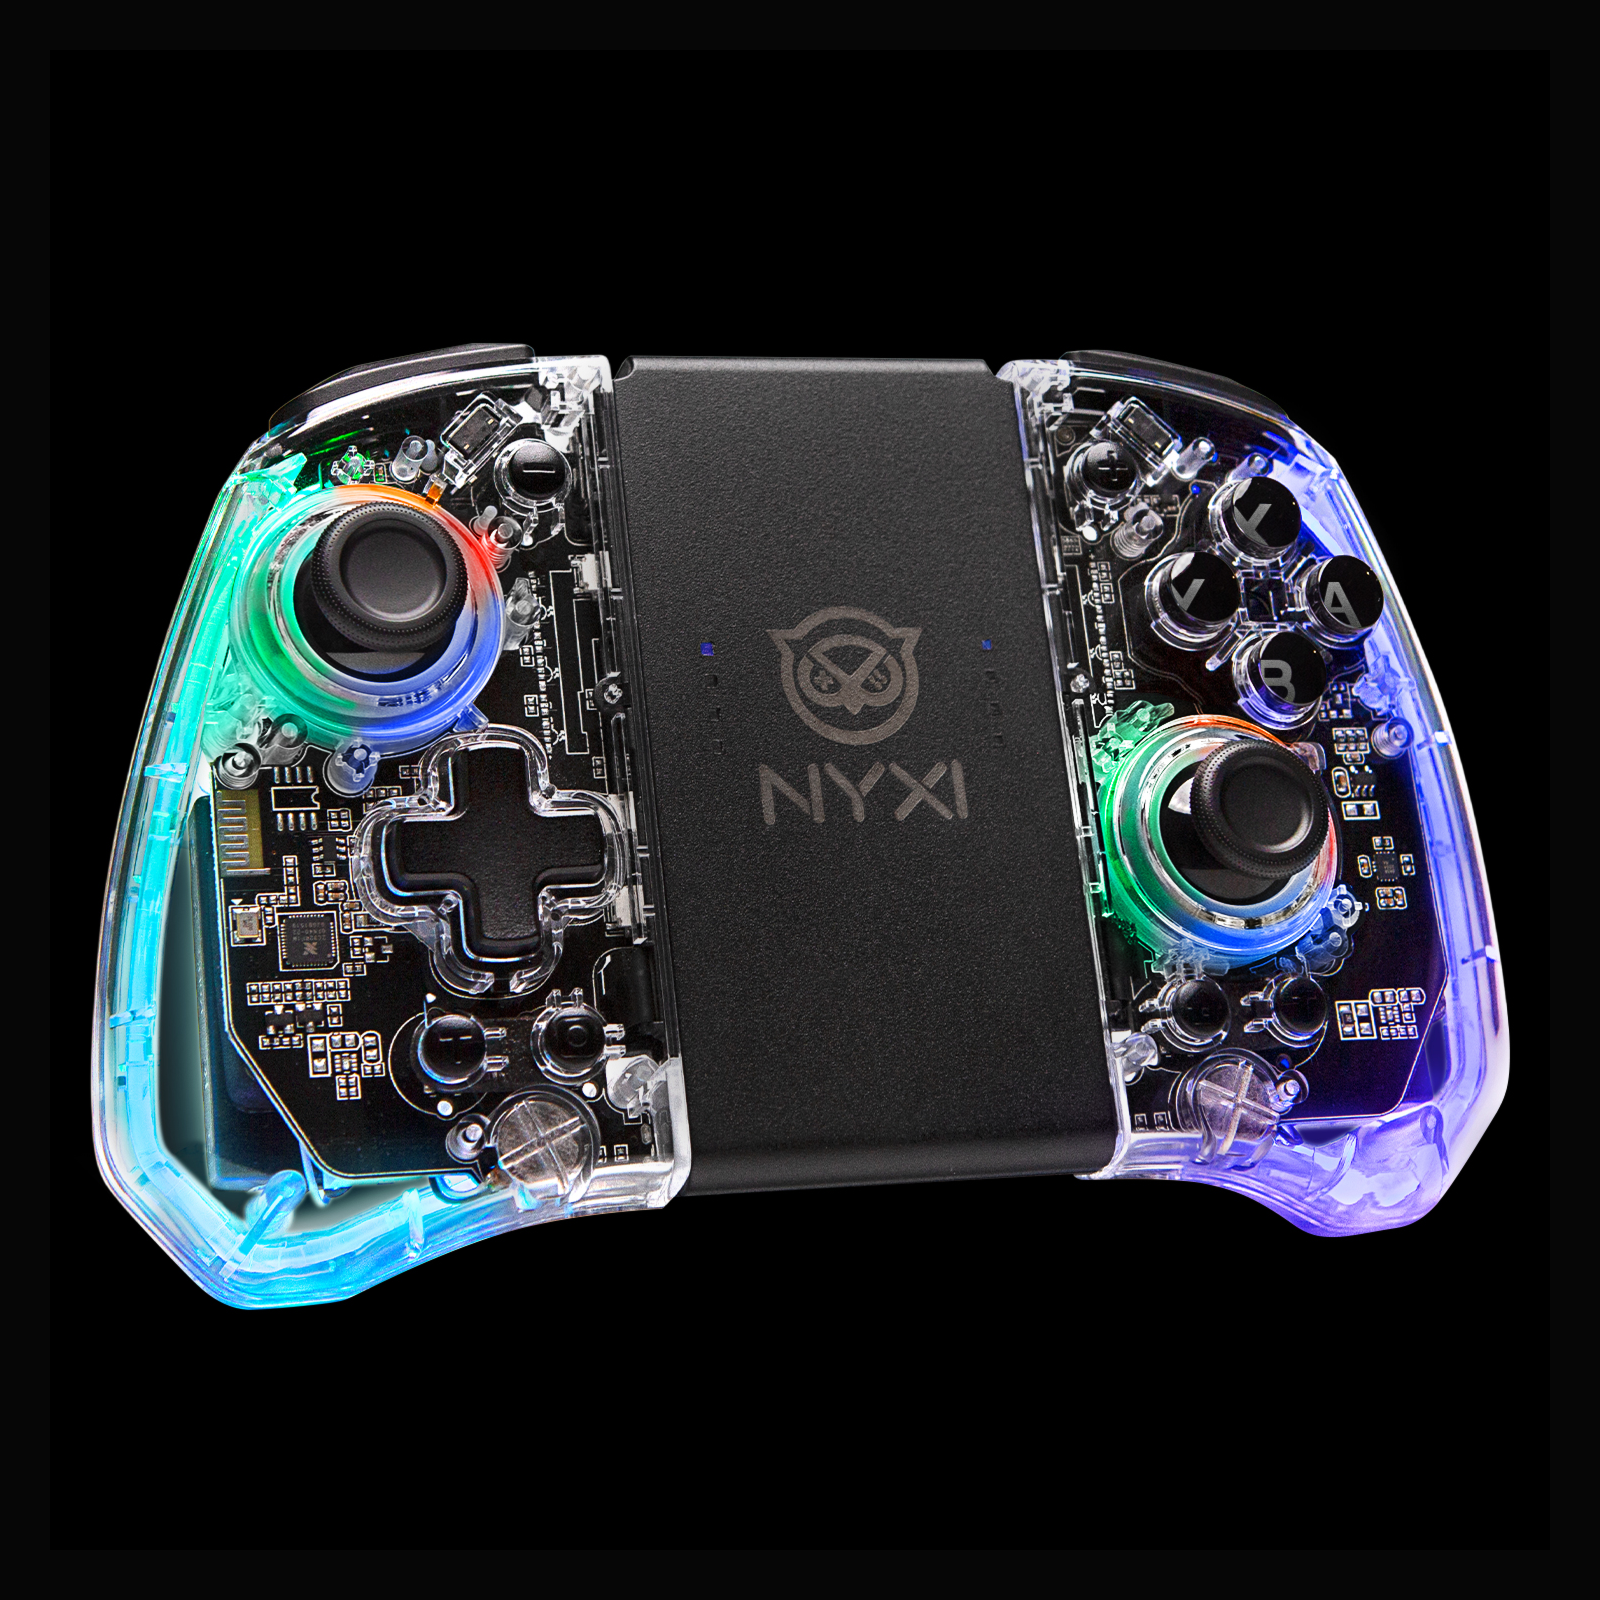 Review – NYXI Wireless Joy-Pad with 8-Color LED - Geeks Under Grace